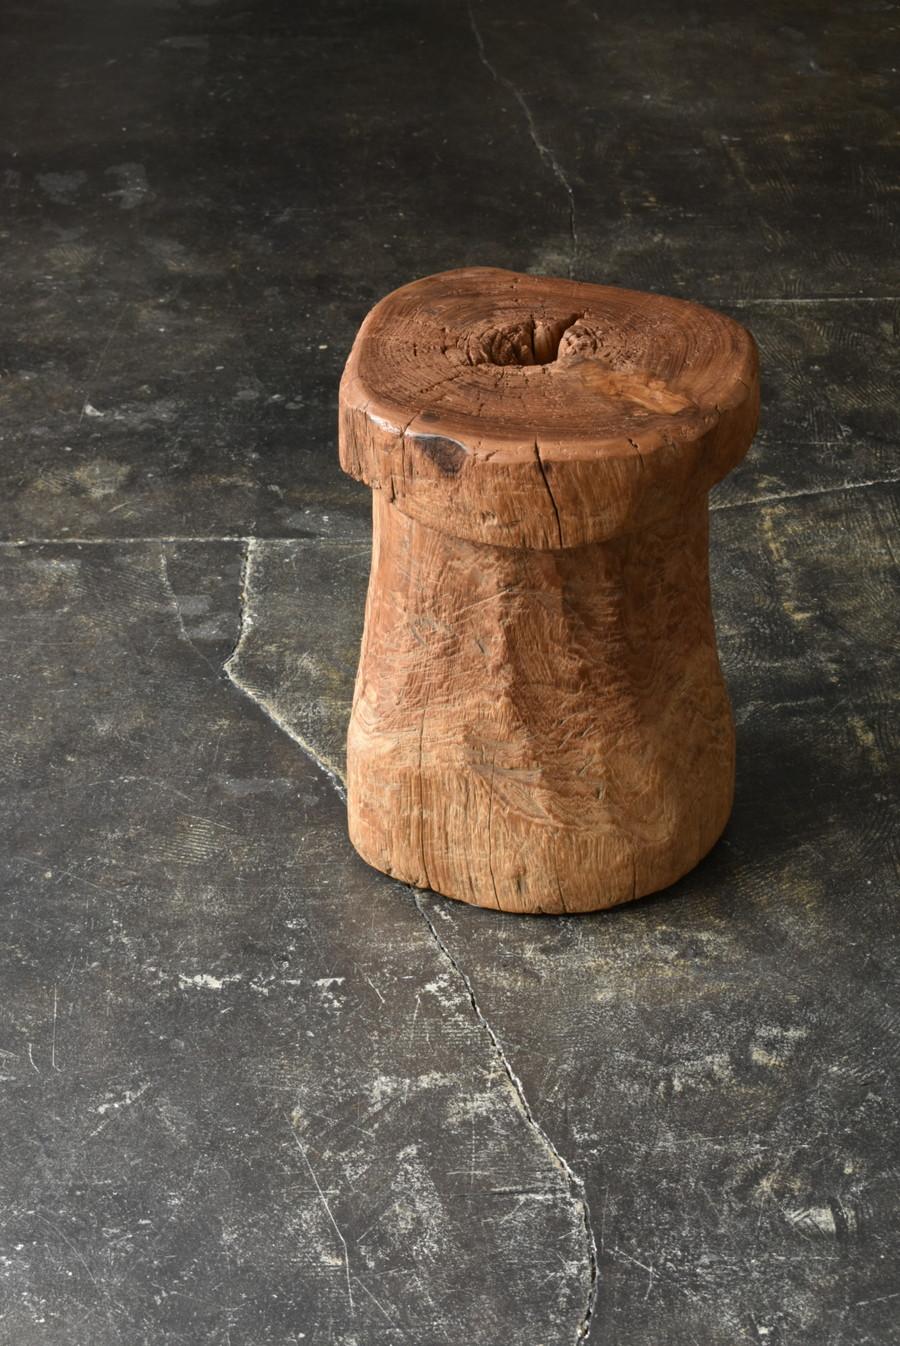 This is a mortar stool made in Bali, Indonesia.
It was made in the late 19th century to early 20th century.
It seems that the mortar was turned upside down and the bottom part was cut and trimmed.
The material used seems to be teak wood.
It is a